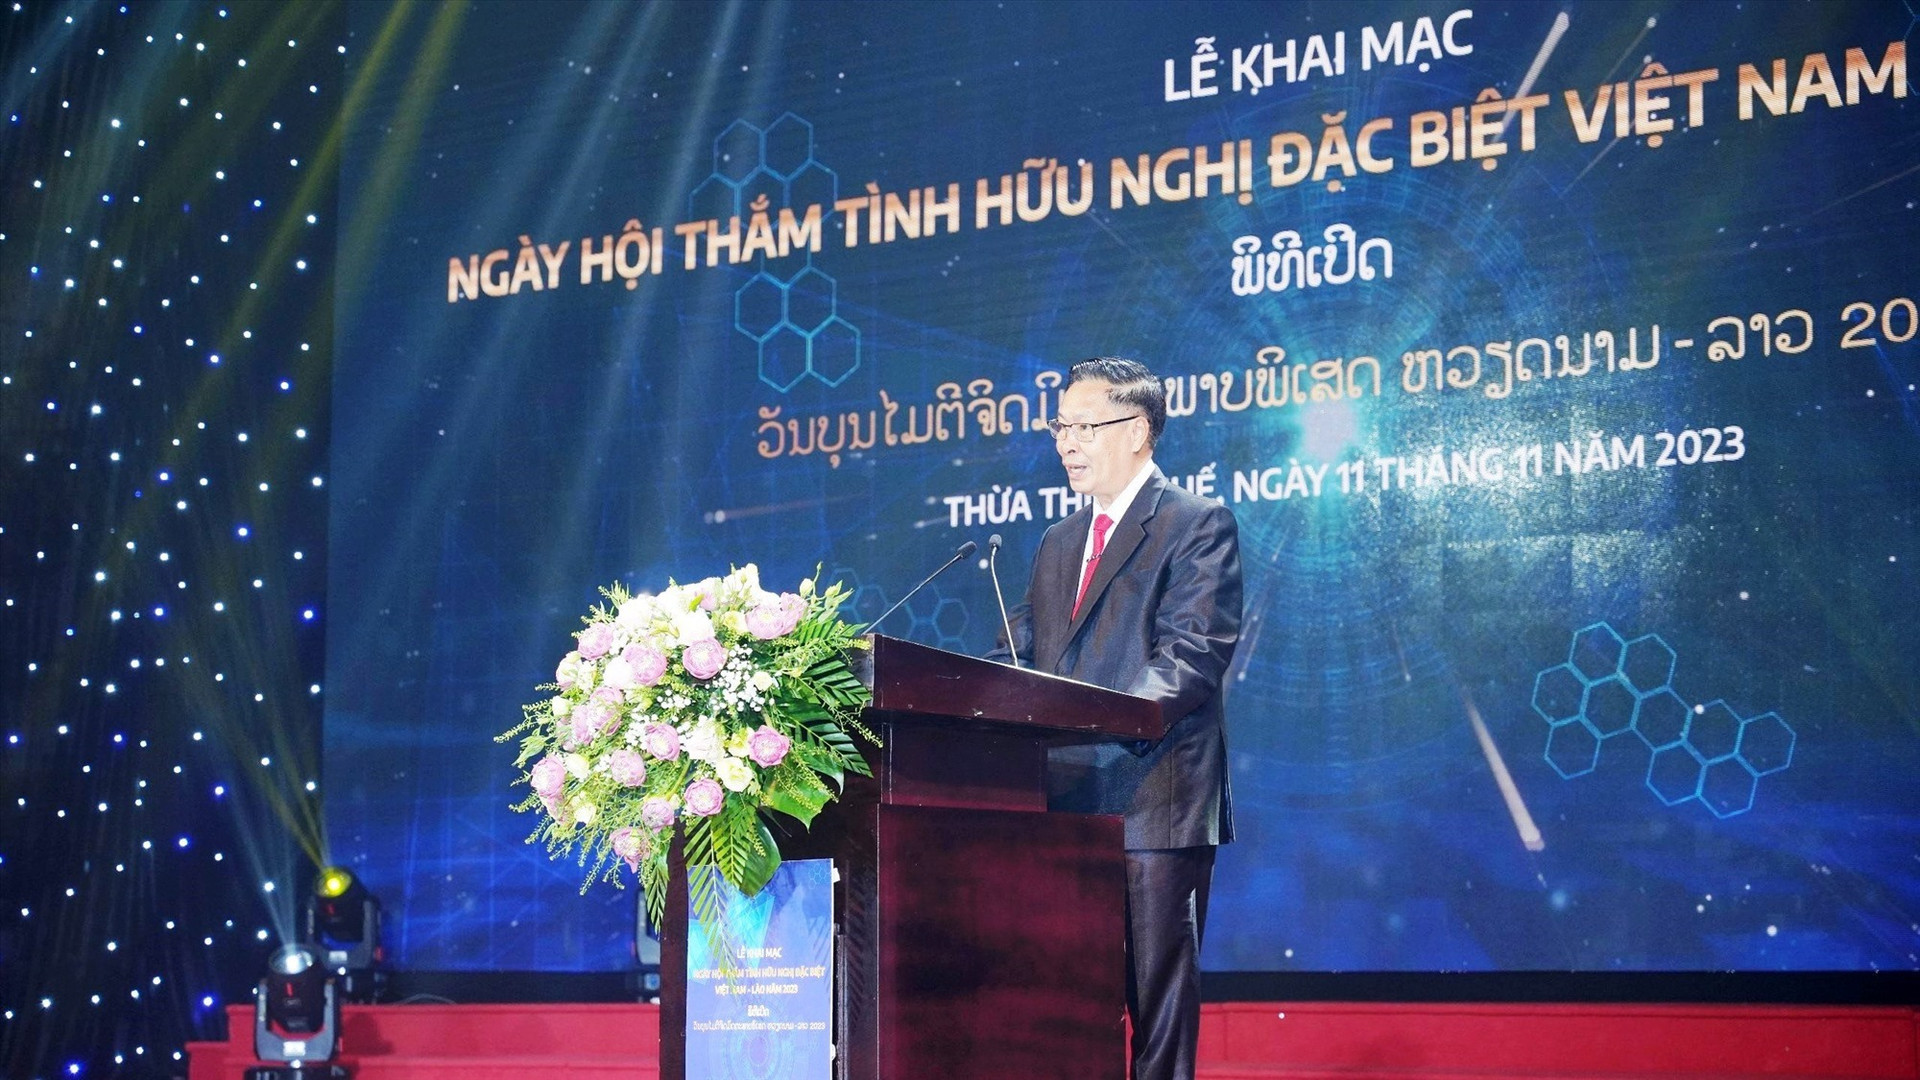 Deputy Minister of Information, Culture and Tourism of Laos Phosy Keomanivong speaks at the event.